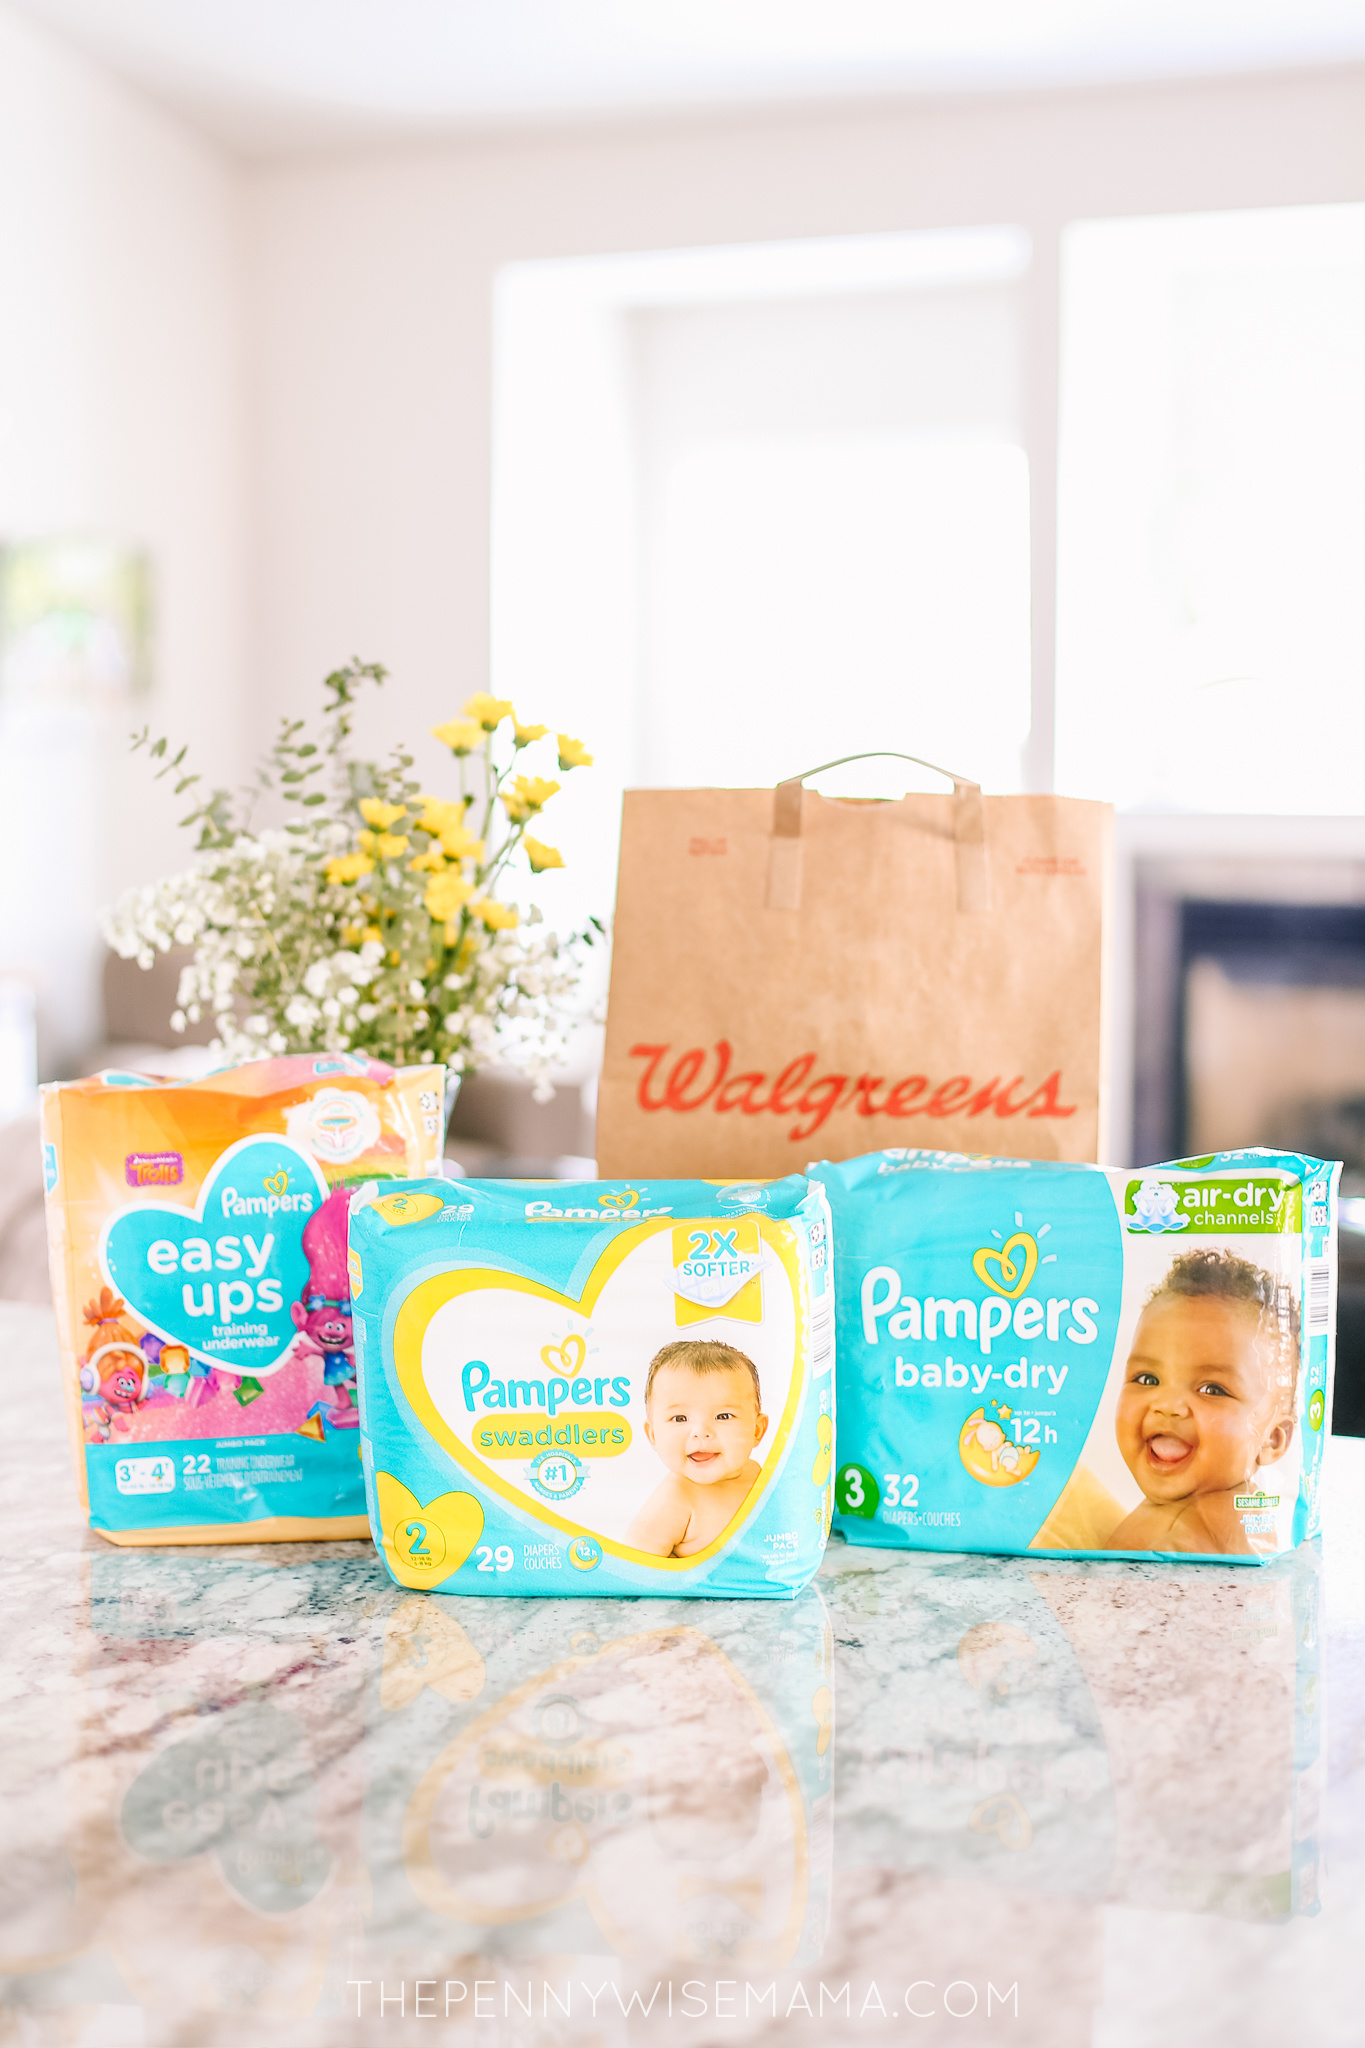 Pampers Diapers Deal - UnderOnly $6 at Walgreens This Week!